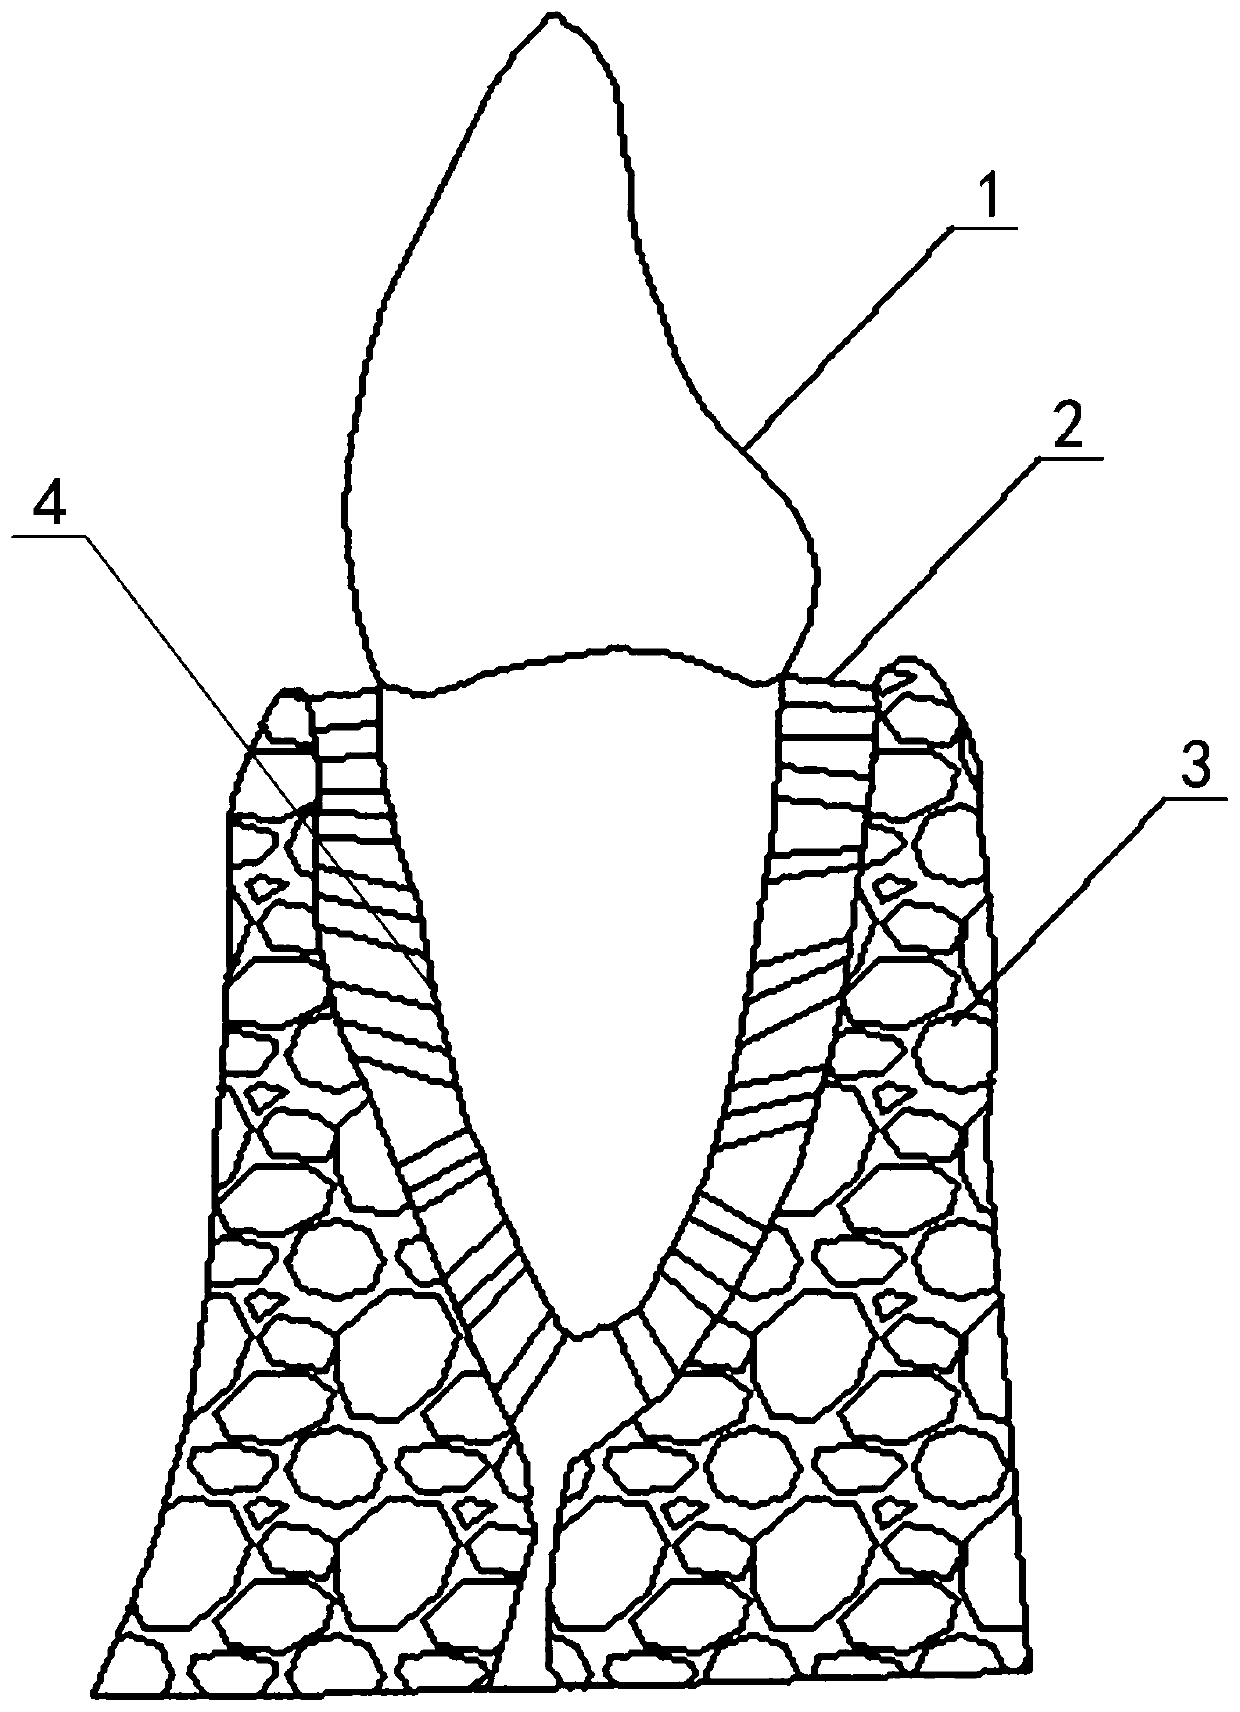 Periodontal ligament stress analysis method and device